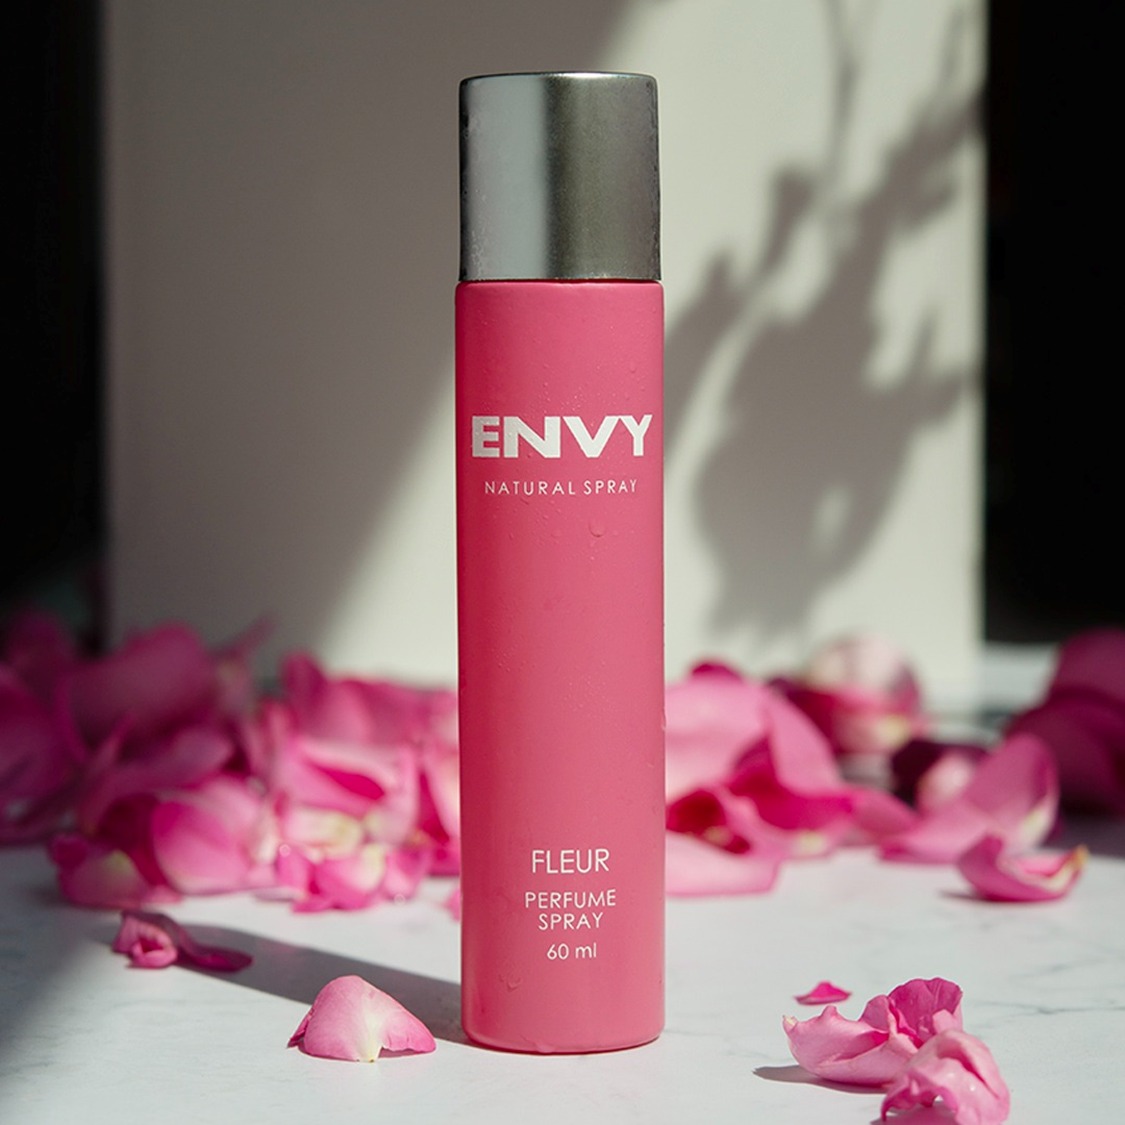 Evoke an aura of timeless sophistication with every spray. 'Fluer' is not just a fragrance; it's an embodiment of style. . . #Envy #Envyfragrance #Shine #Fragrancelove #France #Envyfleur #Authenticity #PremiumPerfumes #Essence #trustedfrenchfragrance #french #perfume #Trust